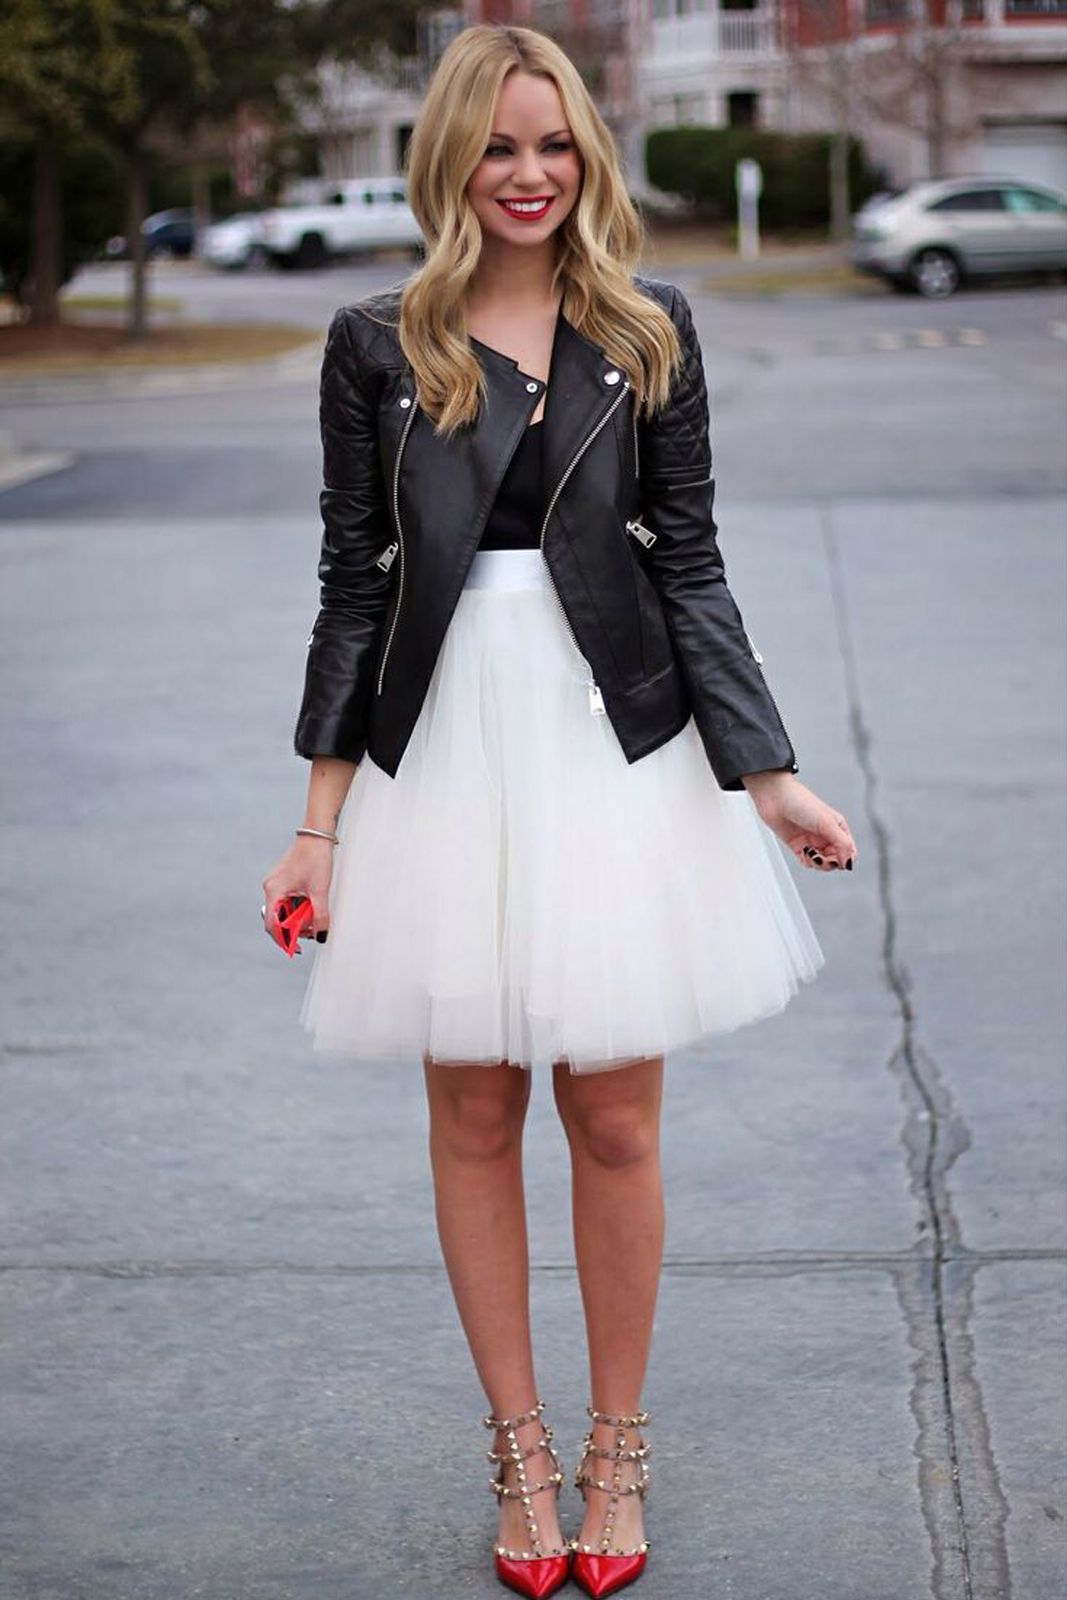 Tulle Skirt, The New Fashion Trend You Must Try